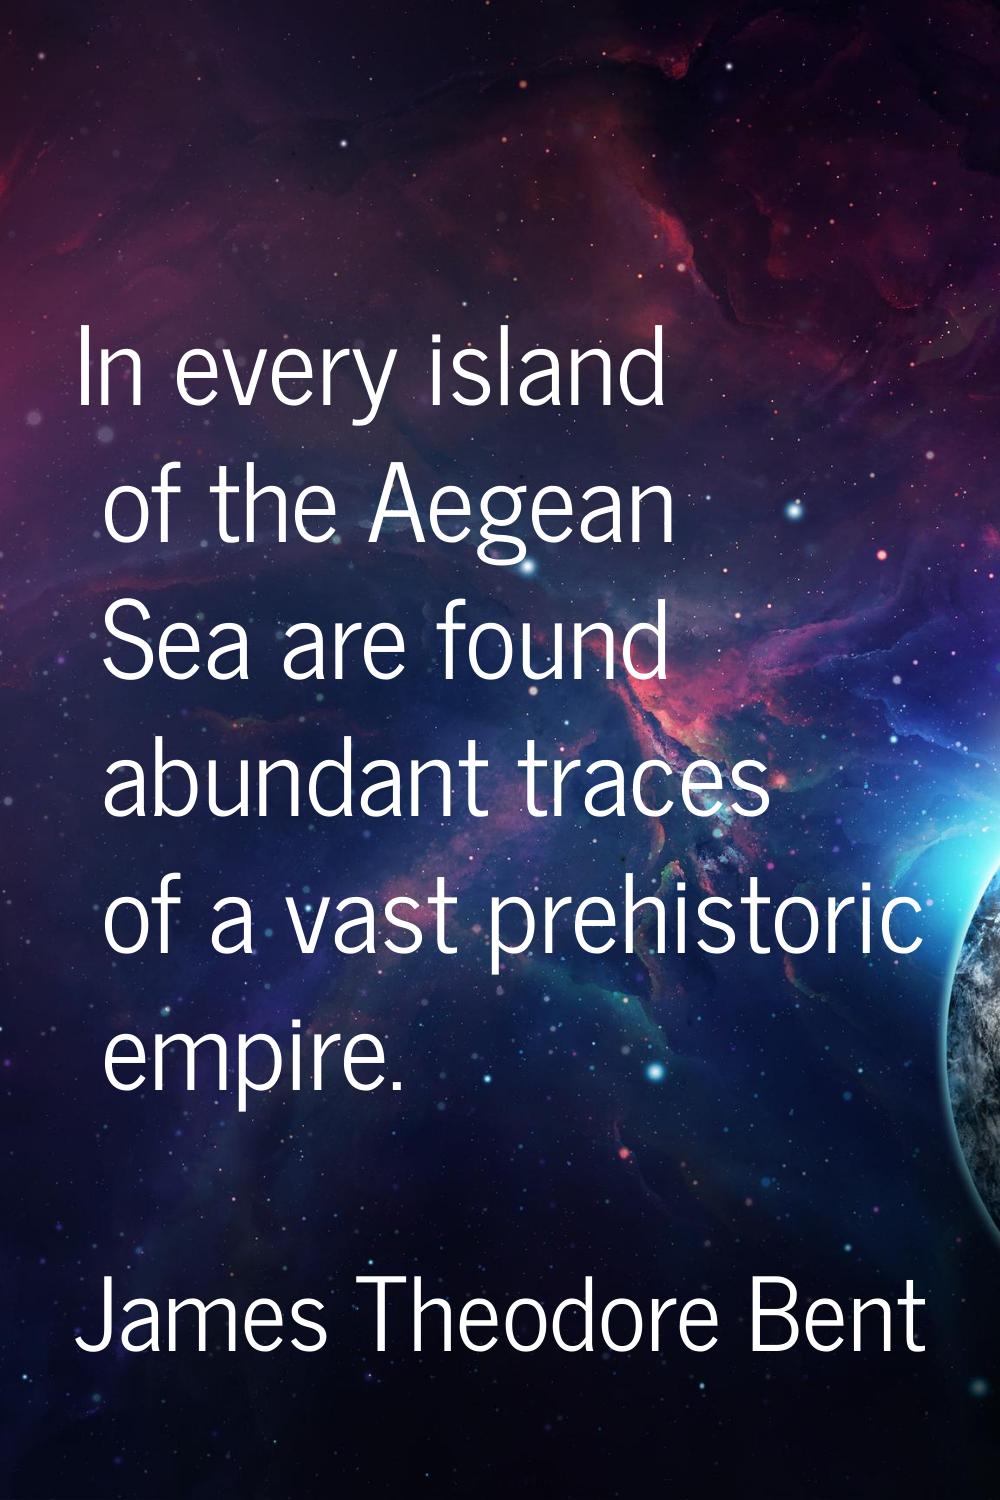 In every island of the Aegean Sea are found abundant traces of a vast prehistoric empire.